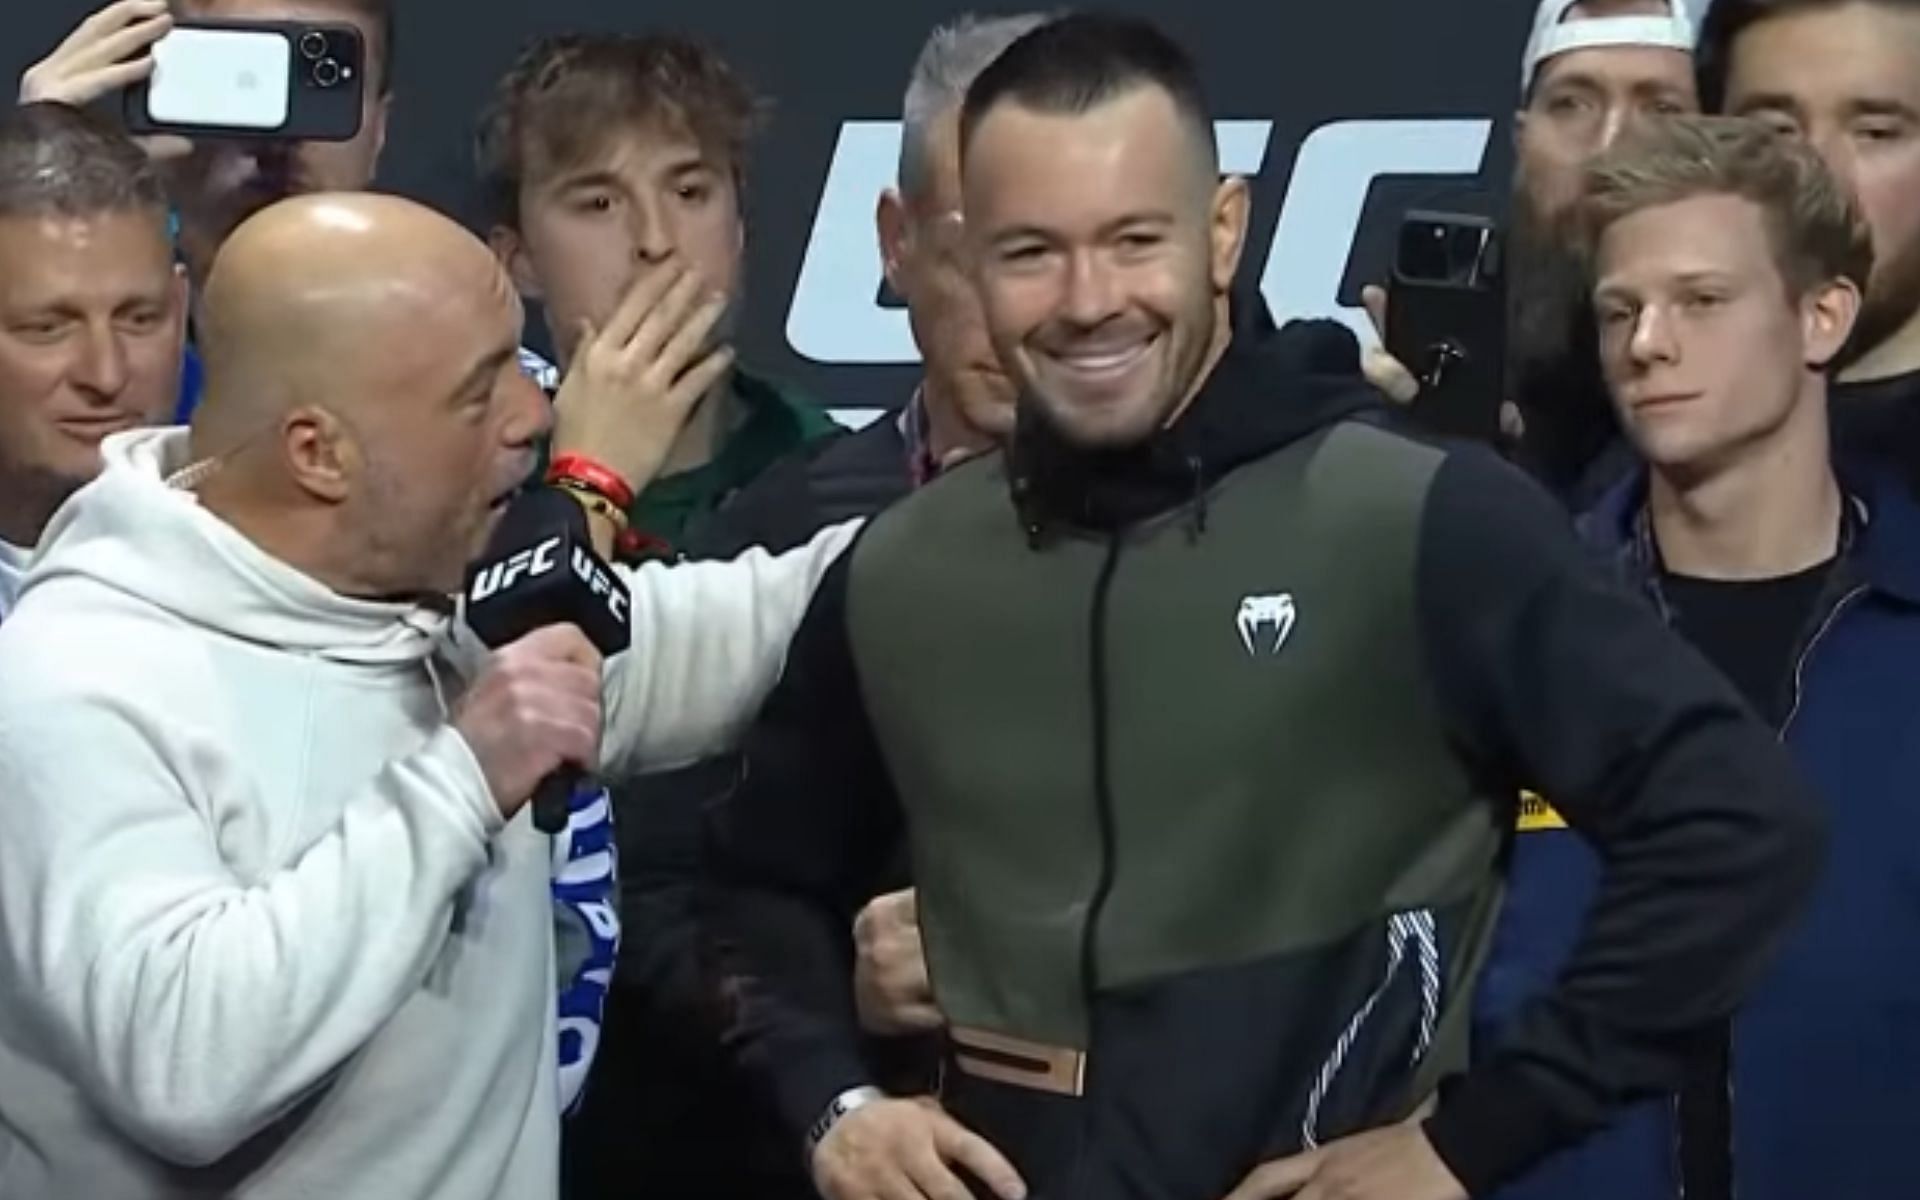 Colby Covington [Pictured] during the UFC 296 Ceremonial Weigh-Ins [Image courtesy: UFC - YouTube]